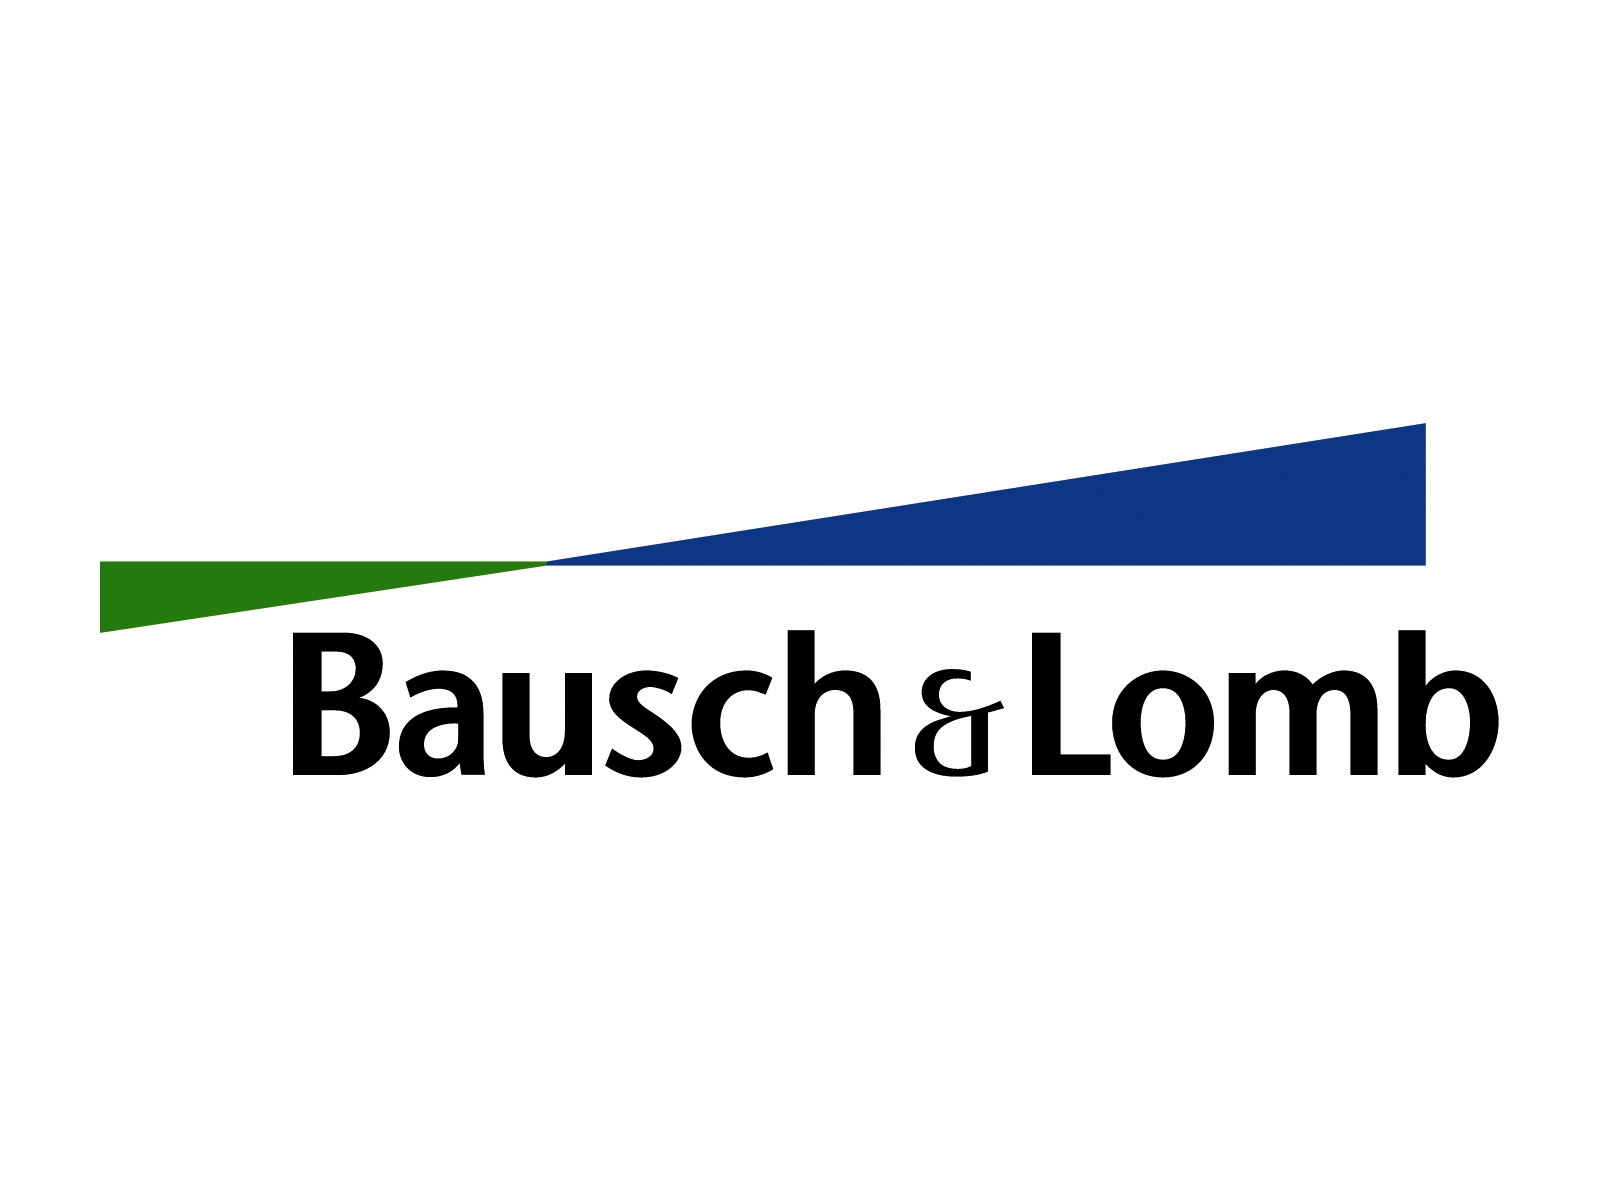 Bausch + Lomb - Logopedia, the logo and branding site